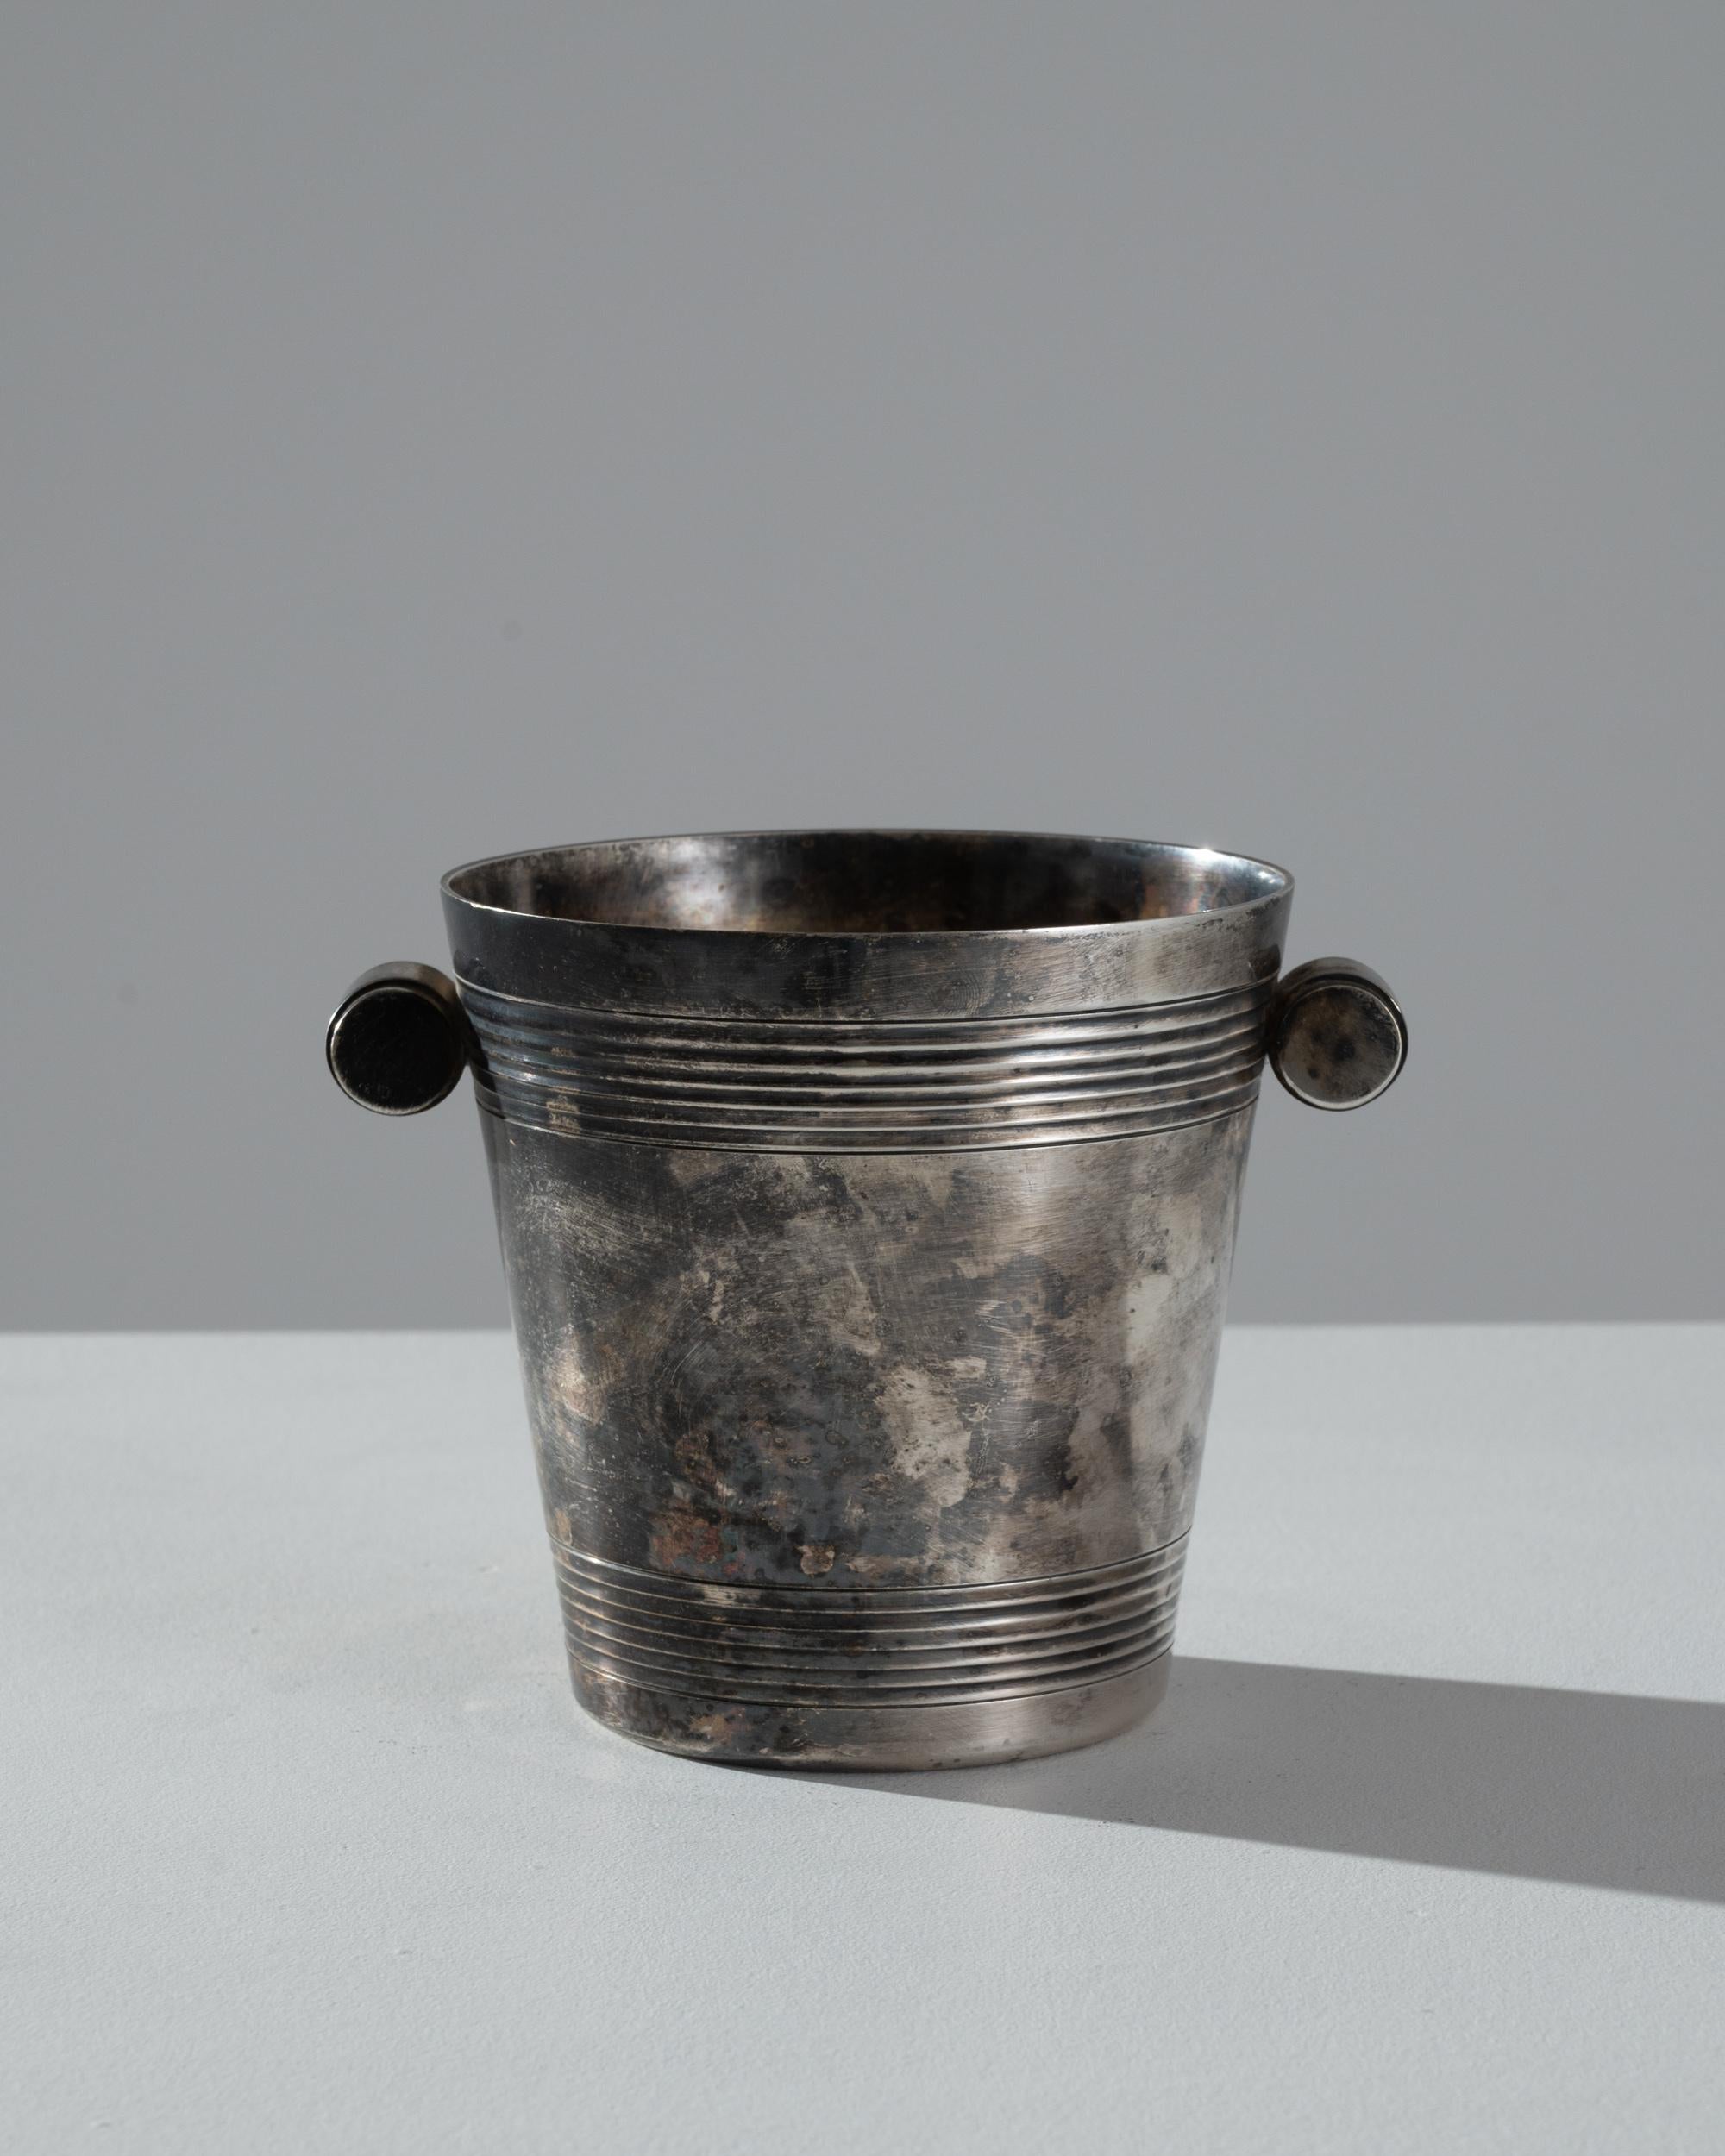 This vintage ice bucket evokes the glamorous parties of the roaring 20s. Made in France in the 20th century, its function harks back to a time when ice was still a precious commodity. This fact is reflected in the use of silver plate tarnished and